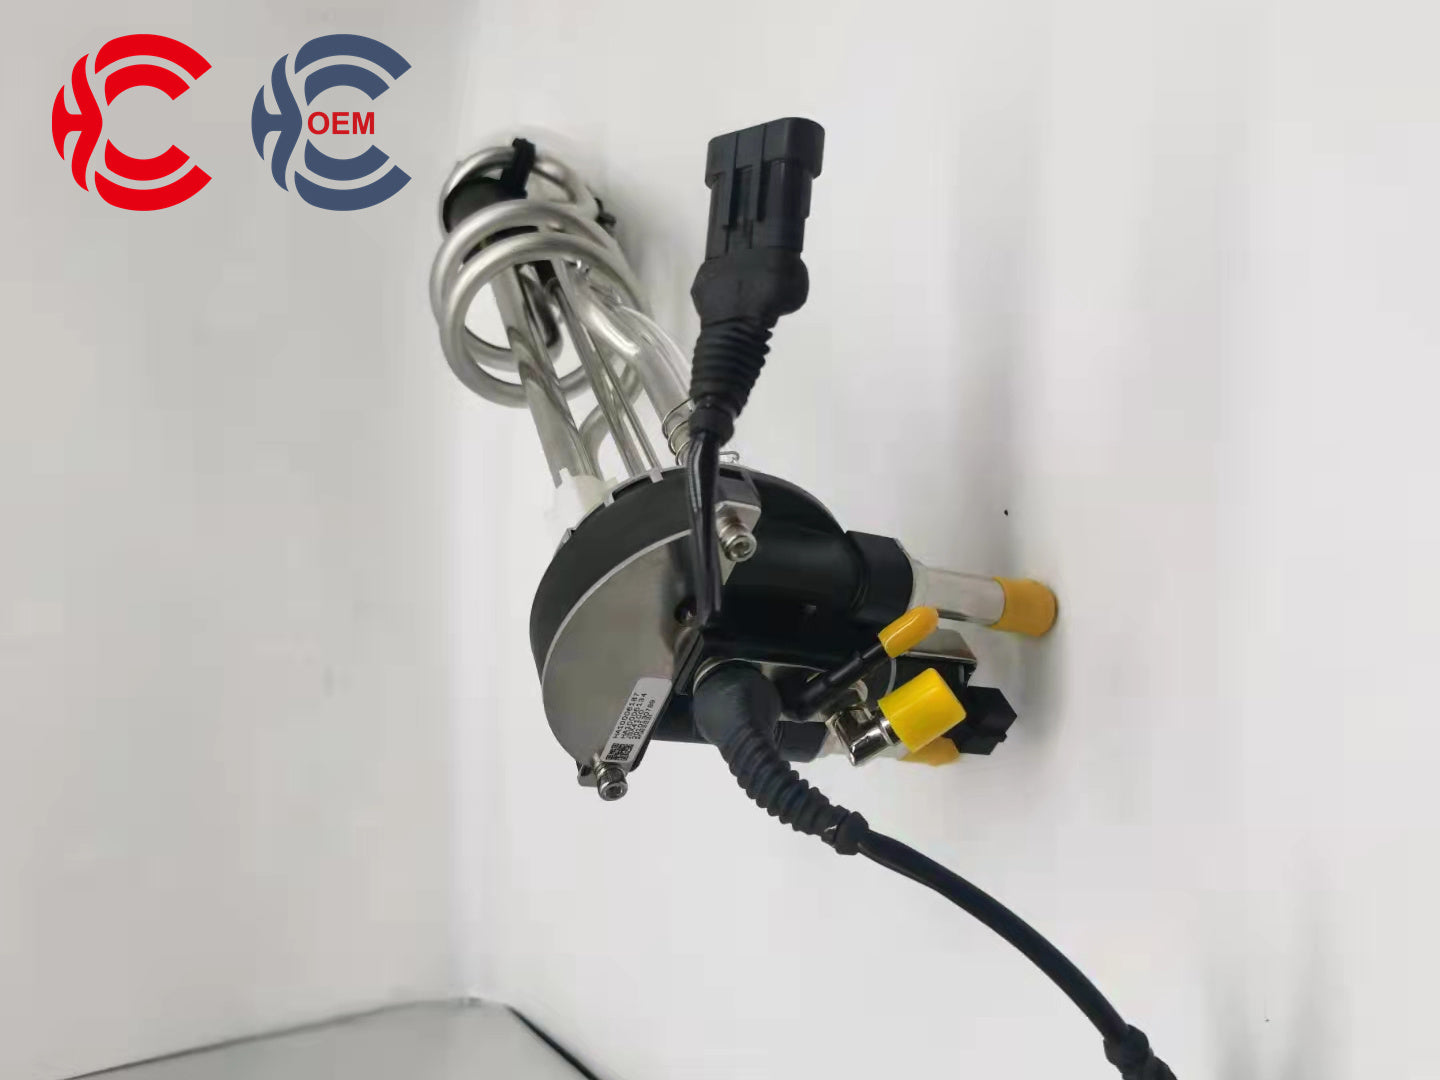 OEM: HA10006187 HA10006134 HENGHEMaterial: ABS metalColor: black silverOrigin: Made in ChinaWeight: 1000gPacking List: 1* Adblue Pump More ServiceWe can provide OEM Manufacturing serviceWe can Be your one-step solution for Auto PartsWe can provide technical scheme for you Feel Free to Contact Us, We will get back to you as soon as possible.